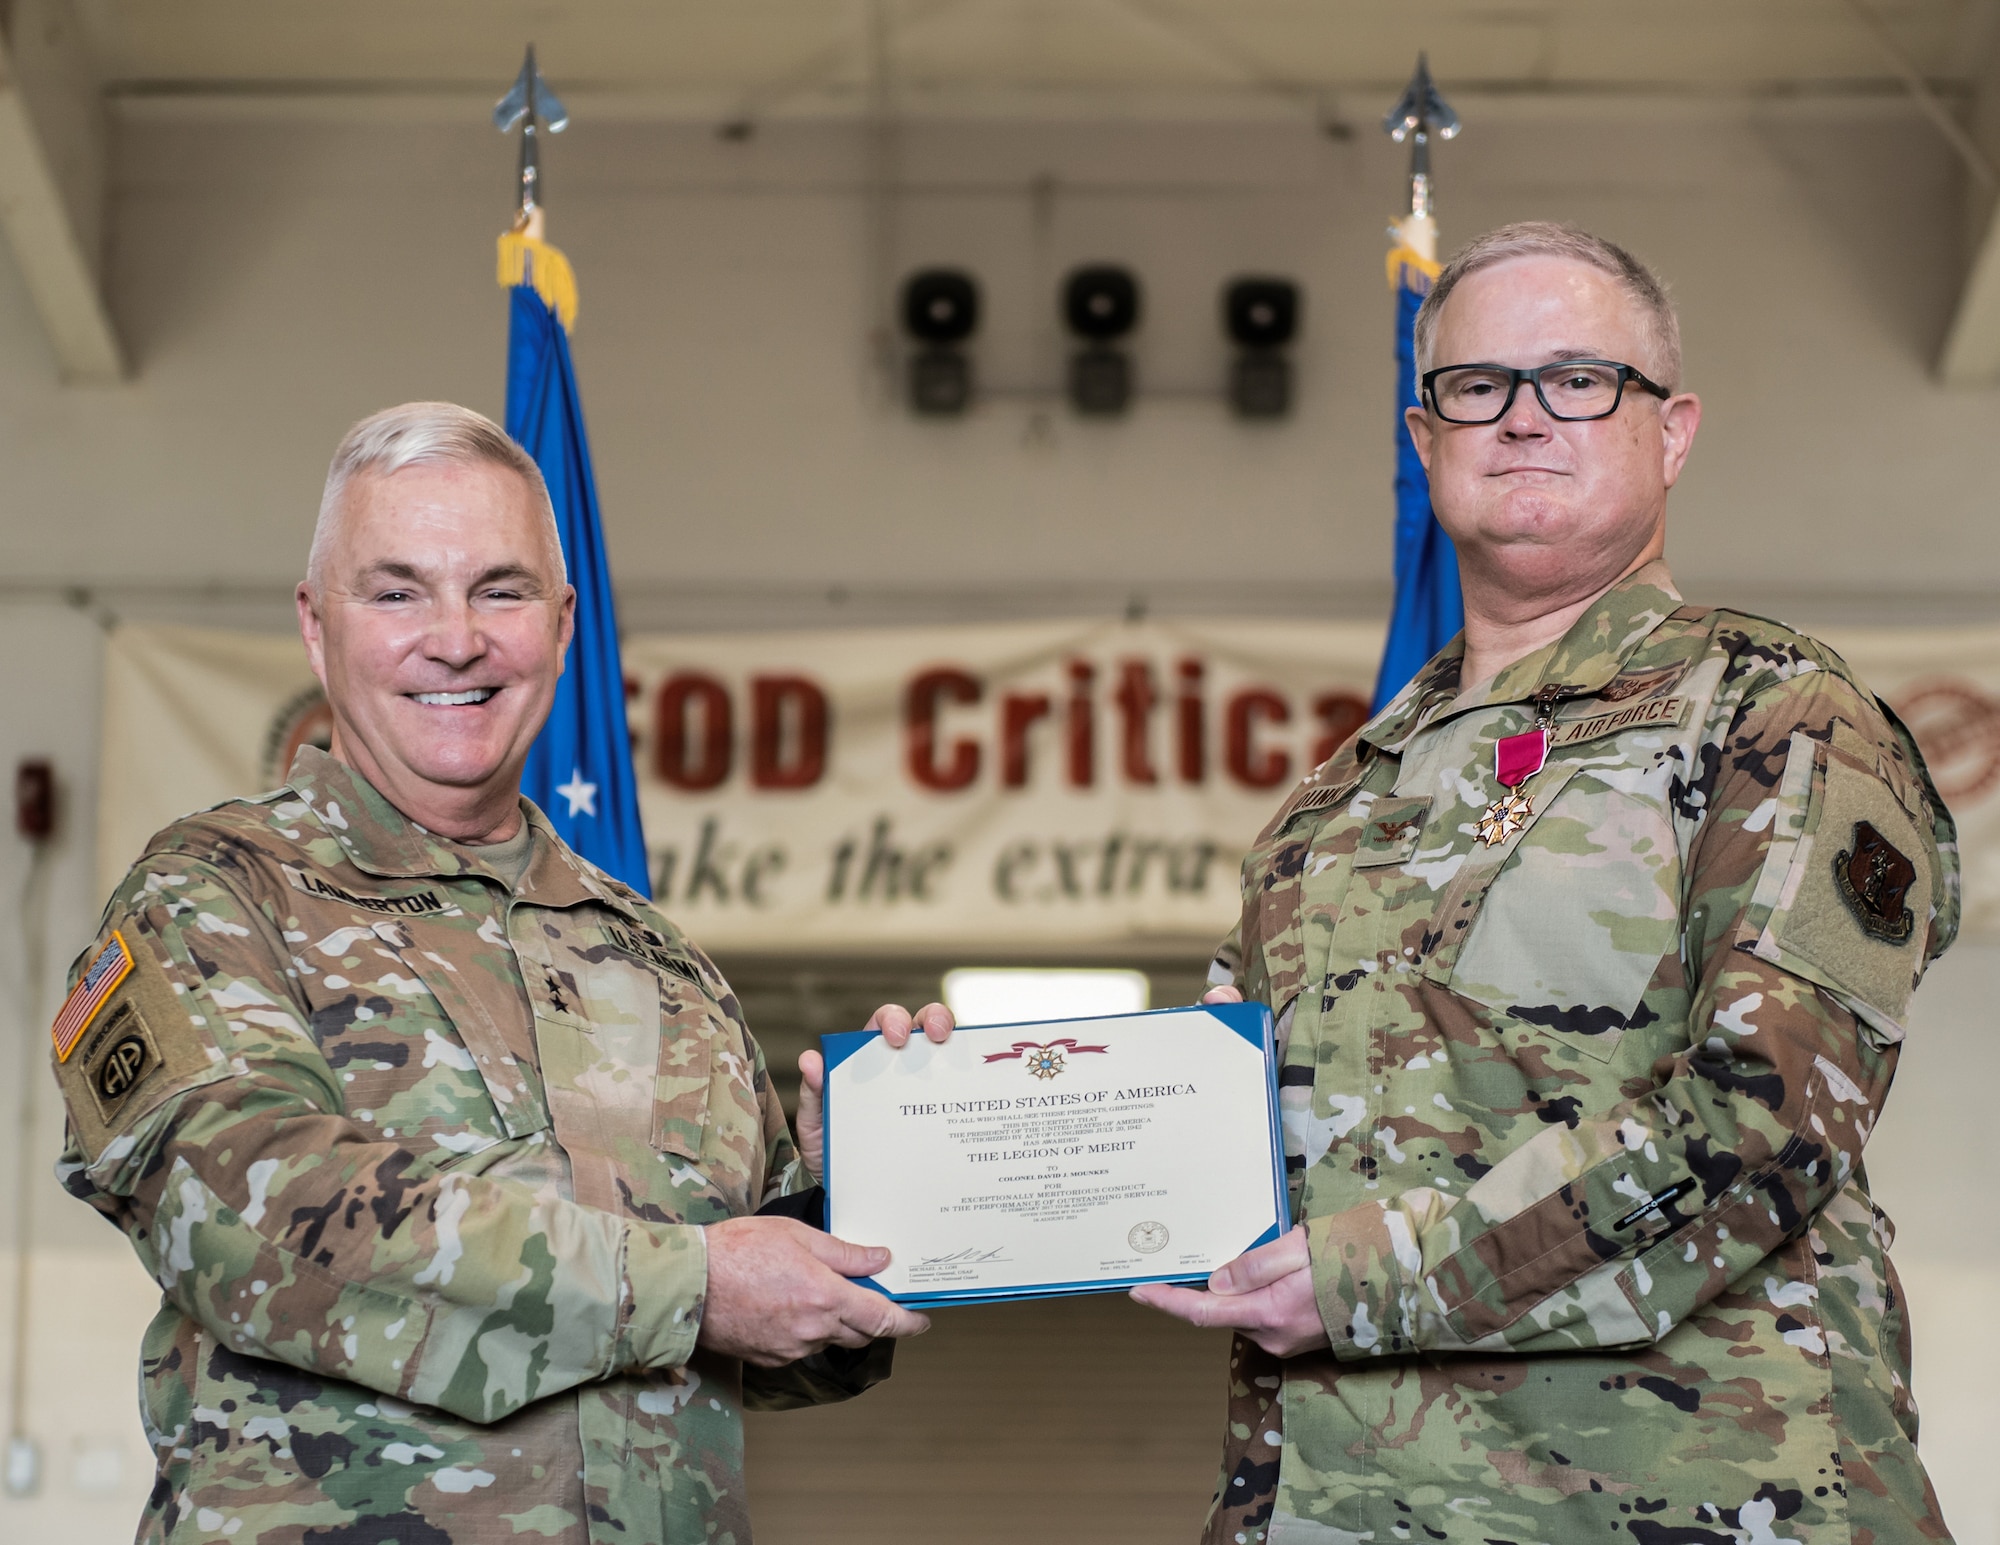 Maj. Gen. Haldane B. Lamberton, left, adjutant general of the Commonwealth of Kentucky, awards the Legion of Merit to Col. David J. Mounkes, assistant adjutant general for Air, during Mounkes’ promotion ceremony at the Kentucky Air National Guard Base in Louisville, Ky., Aug., 13, 2022. Mounkes also assumed command of the Kentucky Air Guard during the event, taking on the role of assistant adjutant general for Air from Brig. Gen. Jeffrey L. Wilkinson, who is retiring. (U.S. Air National Guard photo by Staff Sgt. Chloe Ochs)